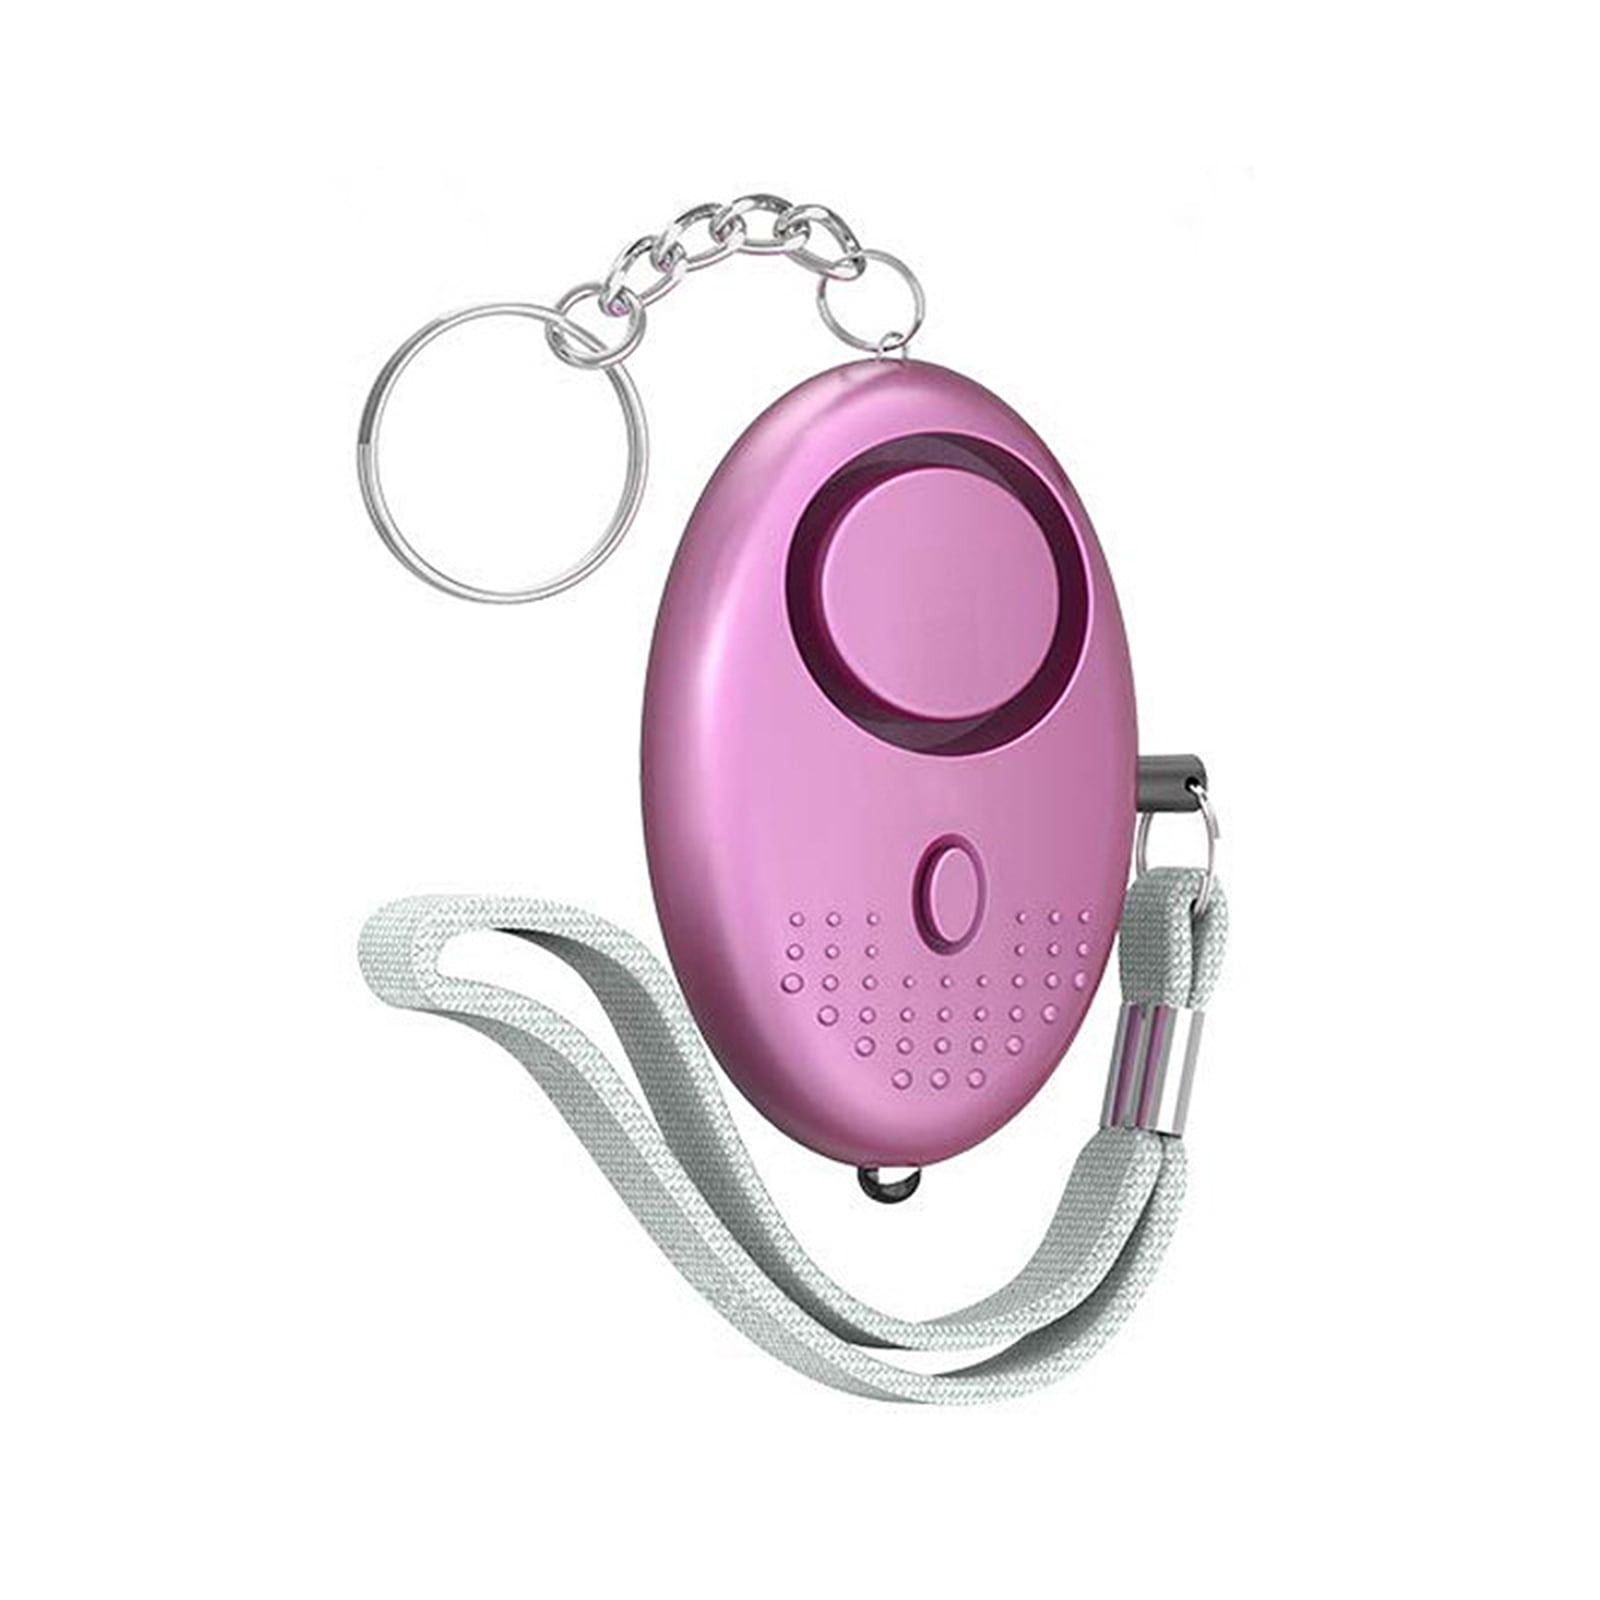 Safety Keychain Set for Women and Kids with Personal Safety Alarm,10 Pcs Self Defense Keychain for Girls,Safety Keychain Accessories Including Panic Alarm Siren,Emergency Tool,No Touch Door Opener 